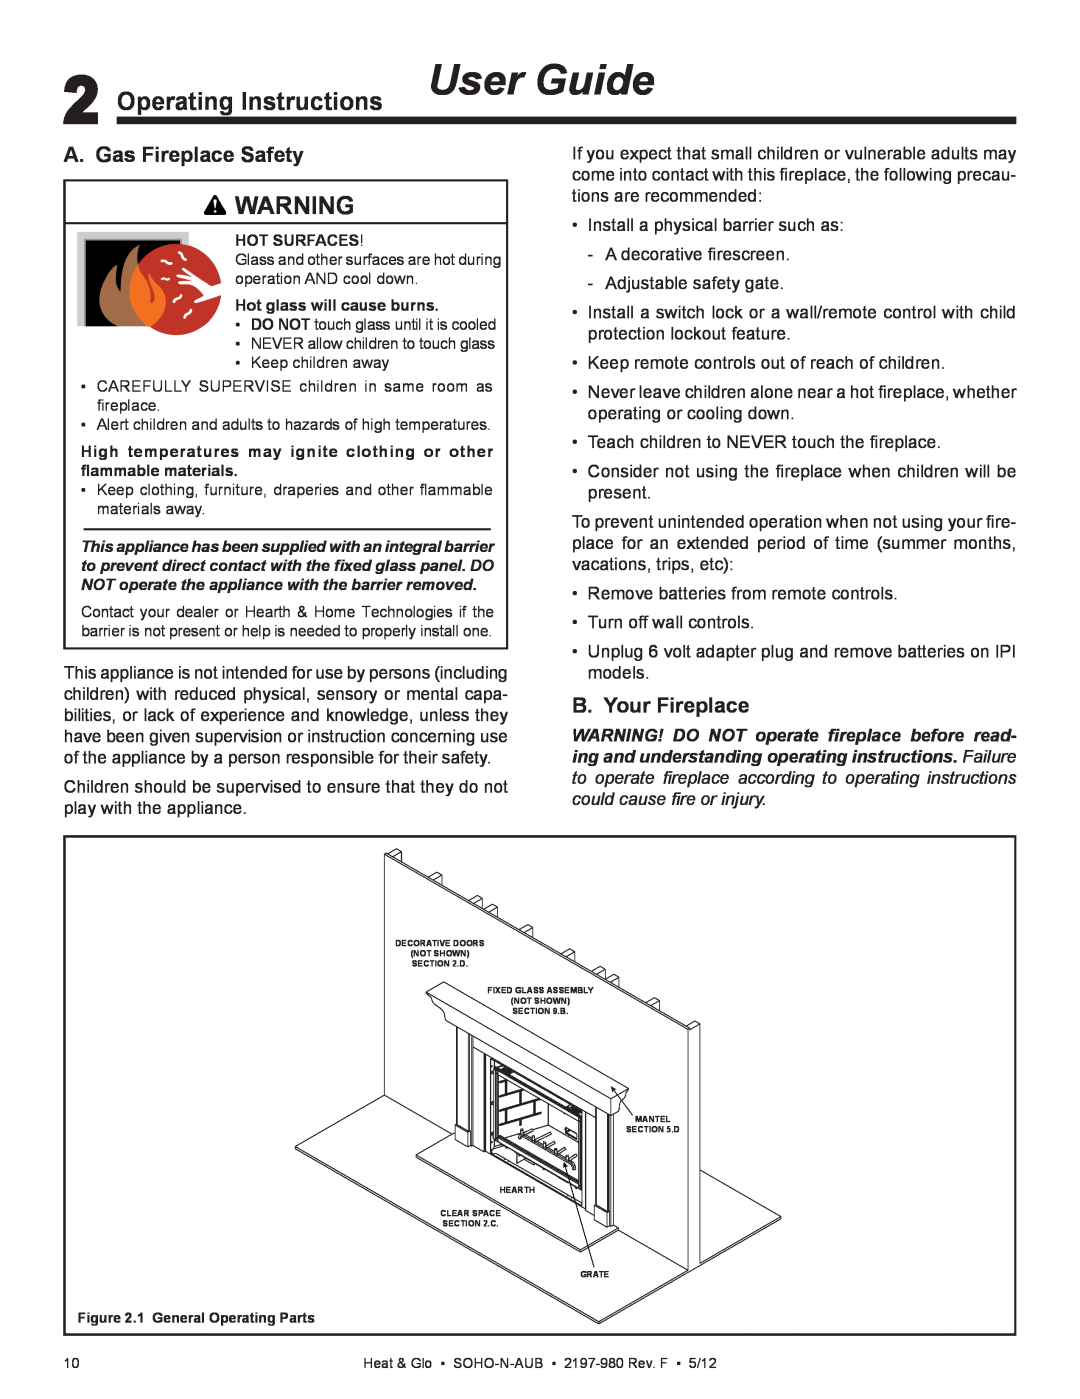 Heat & Glo LifeStyle 2197-980 owner manual Operating Instructions User Guide, A. Gas Fireplace Safety, B. Your Fireplace 